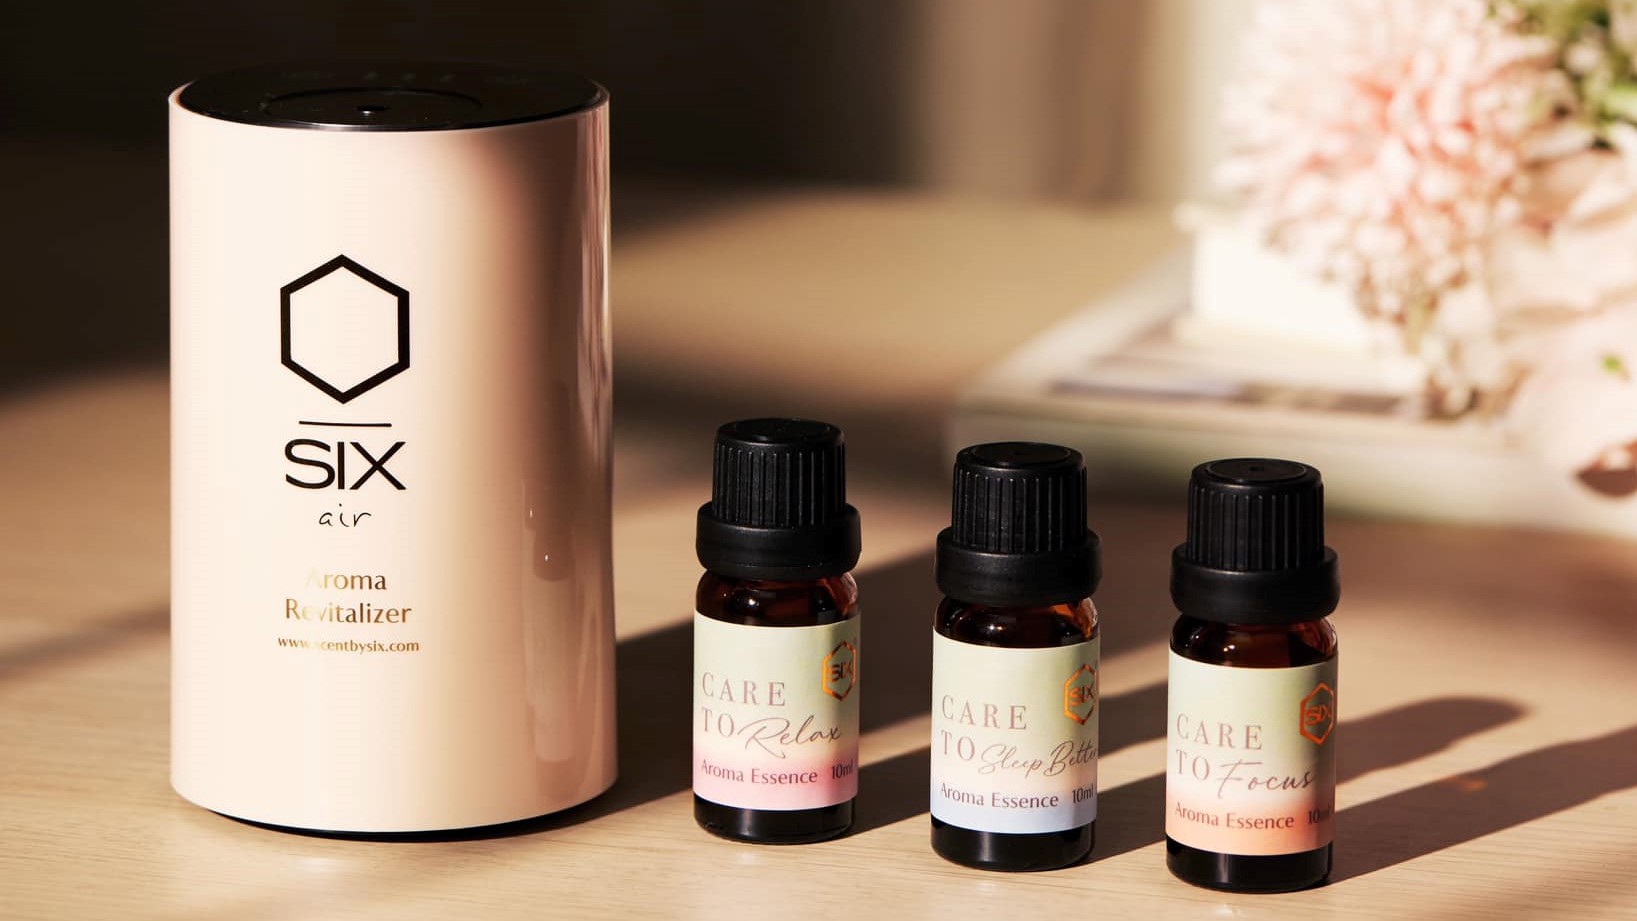 Scent by SIX leverages fragrance tech to tackle the tough issues